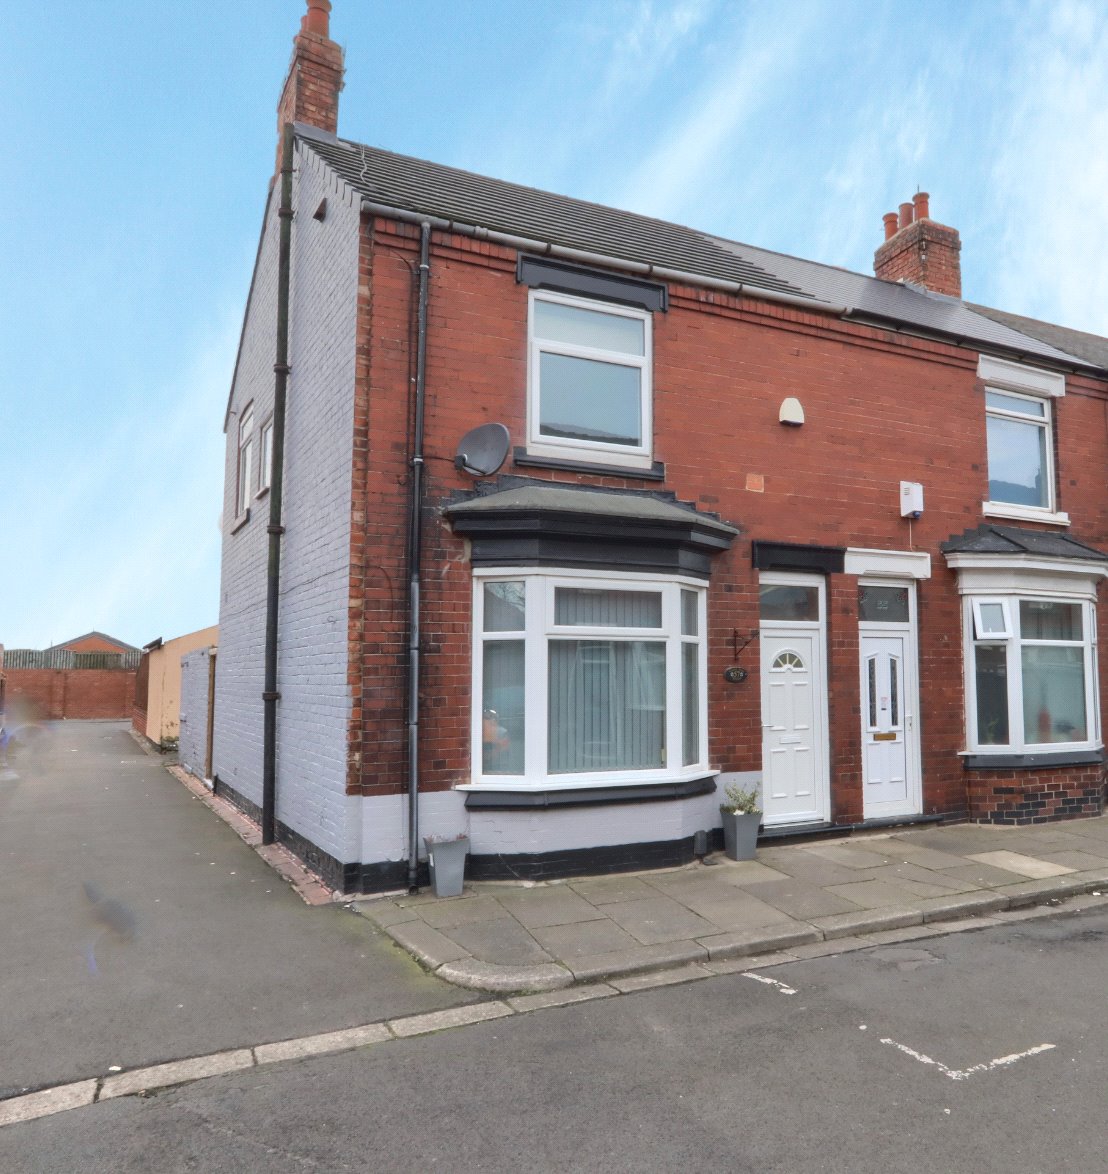 2 bed house for sale in Soppett Street, Redcar - Property Image 1